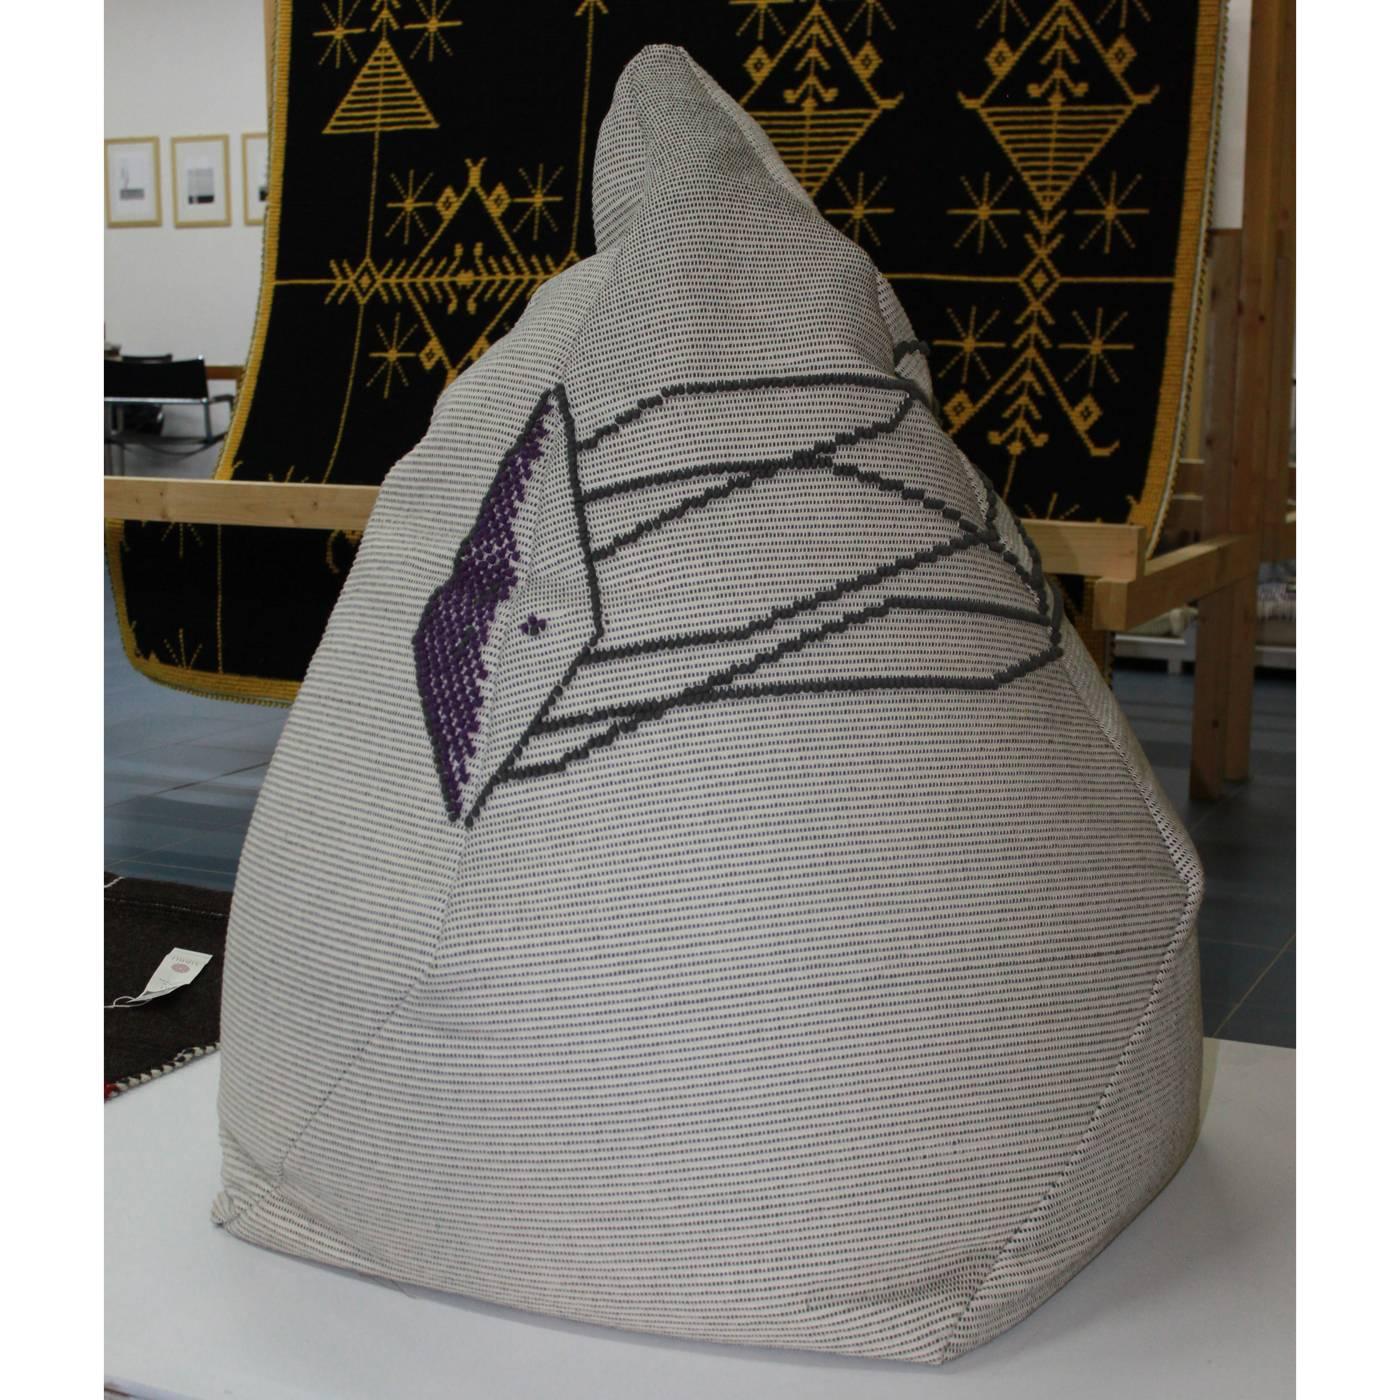 This unique piece was born from the idea of giving the seat a tridimensionality. Its shape is deconstructed and becomes almost conical, but soft. The colors are natural, with a geometric purple decoration running irregularly around the top of the